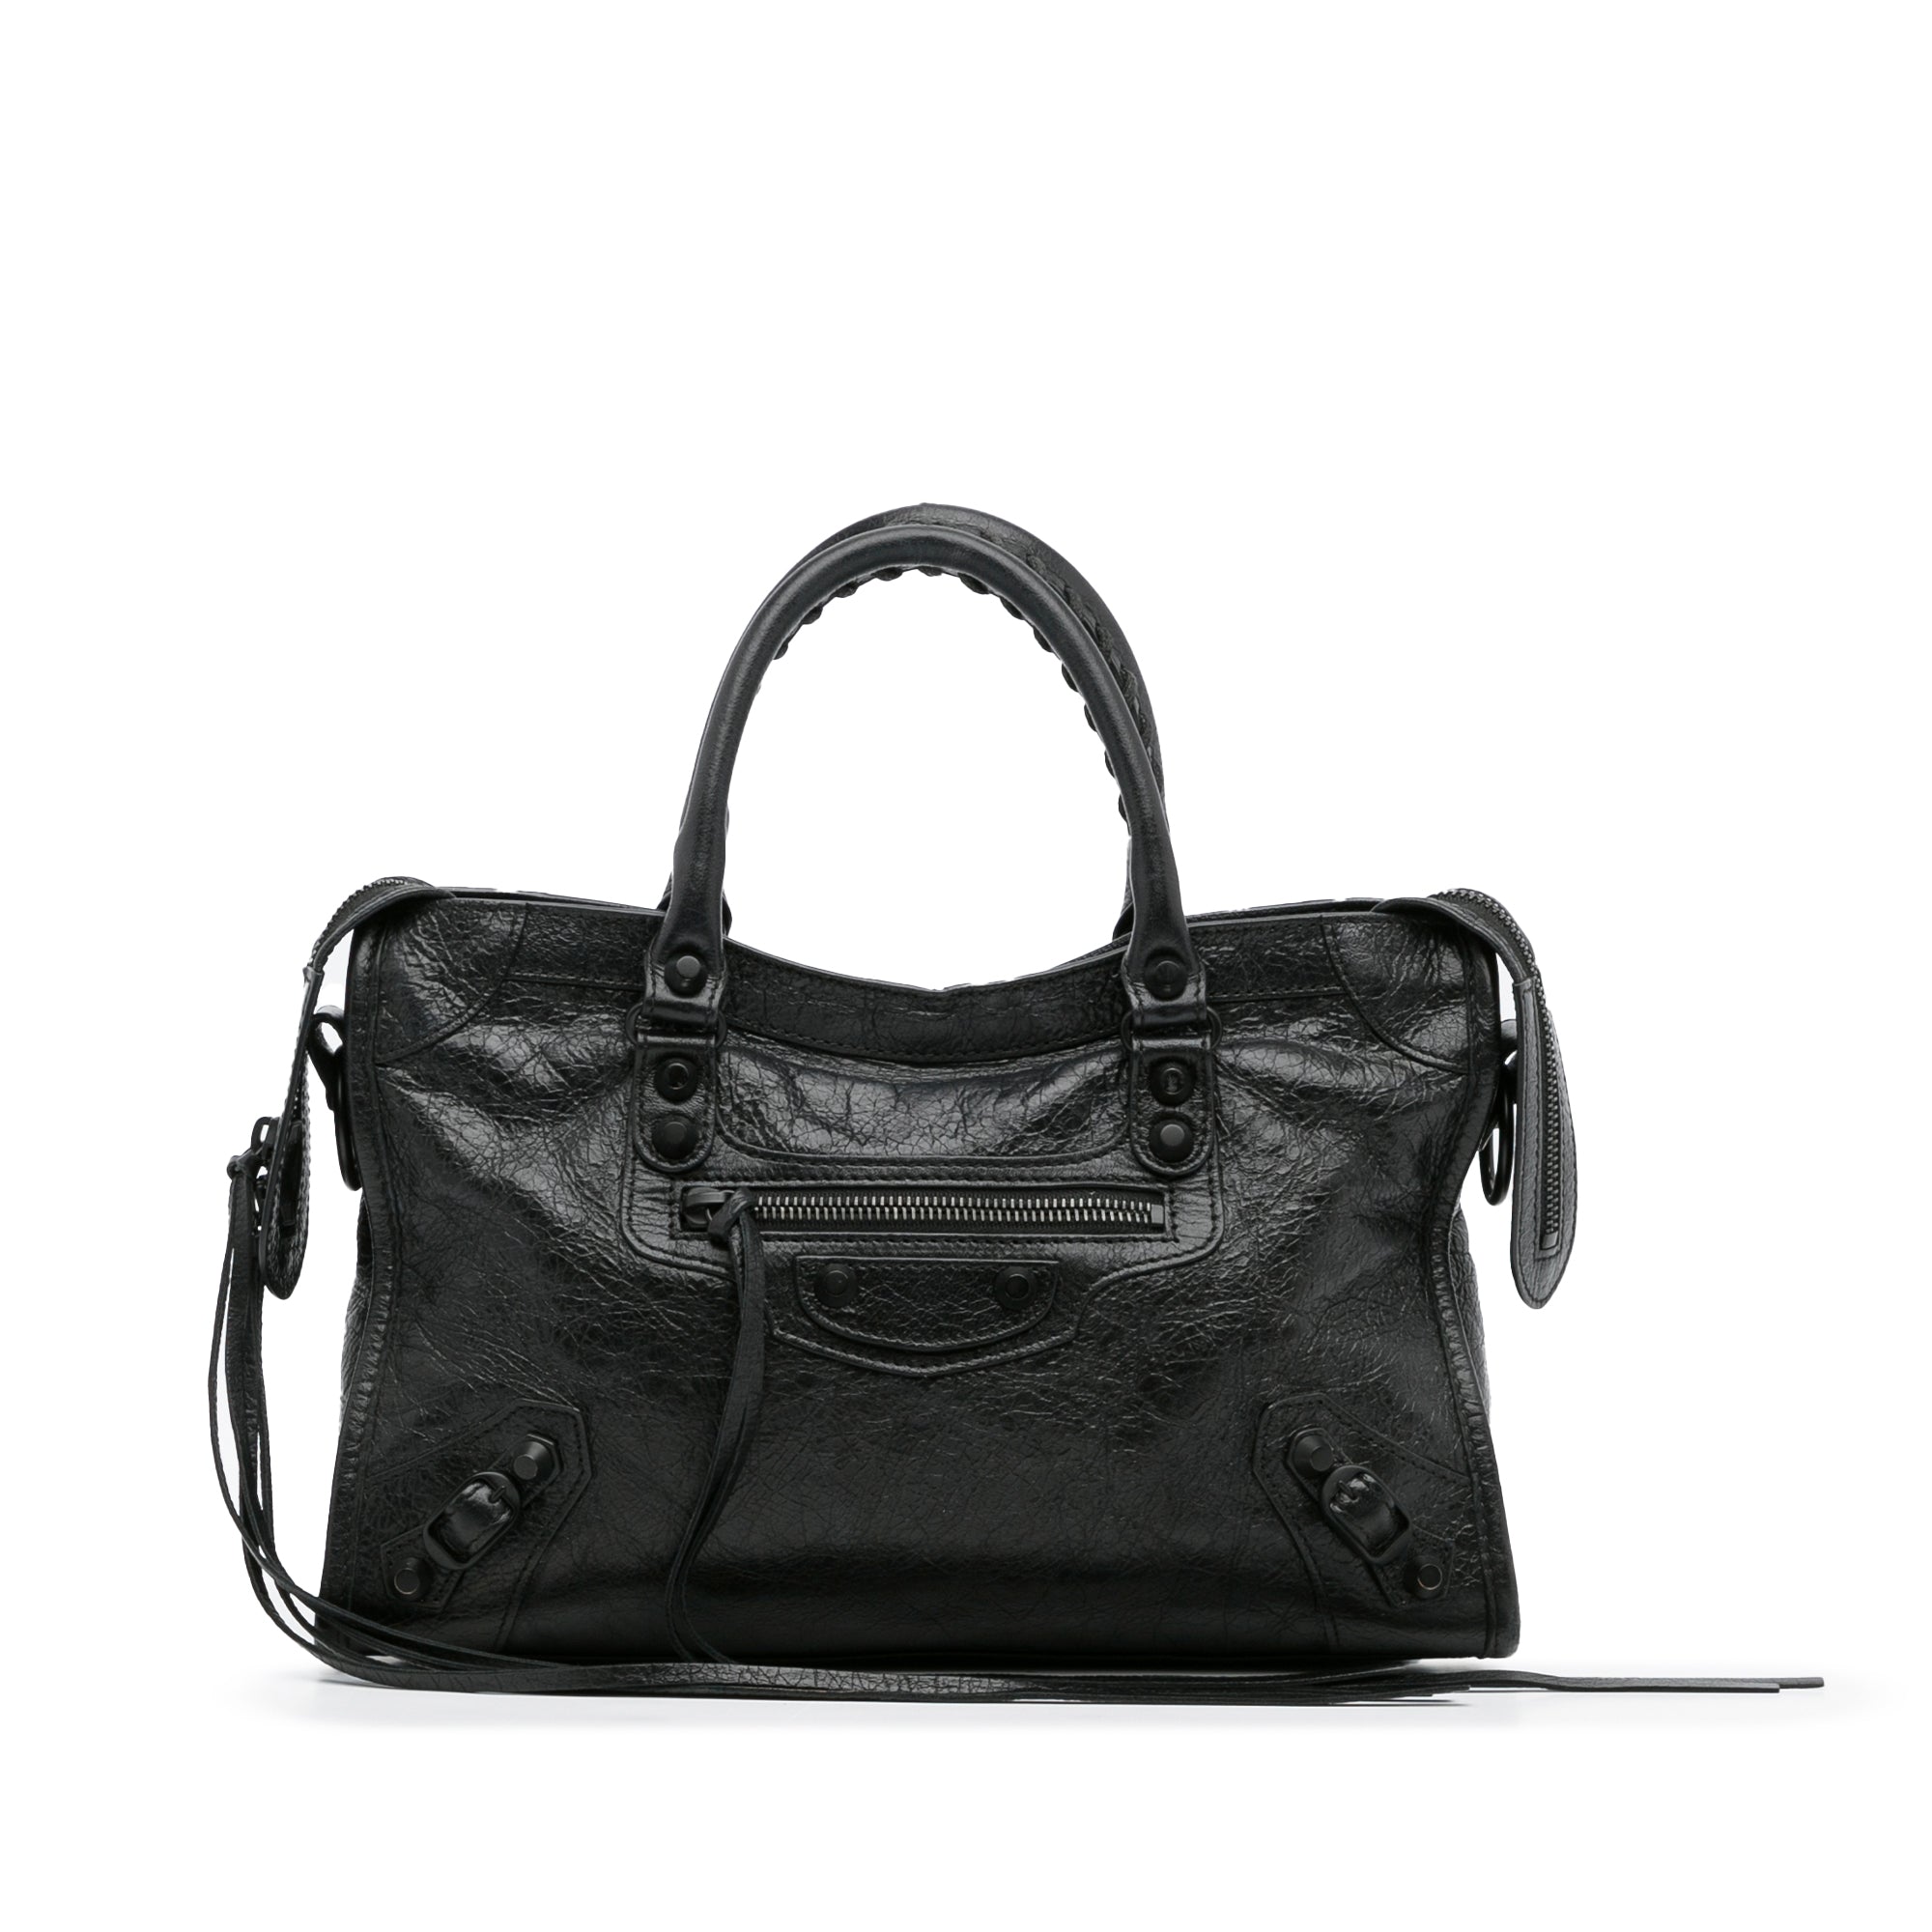 How to Authenticate Balenciaga's Classic City Bag - Academy by FASHIONPHILE